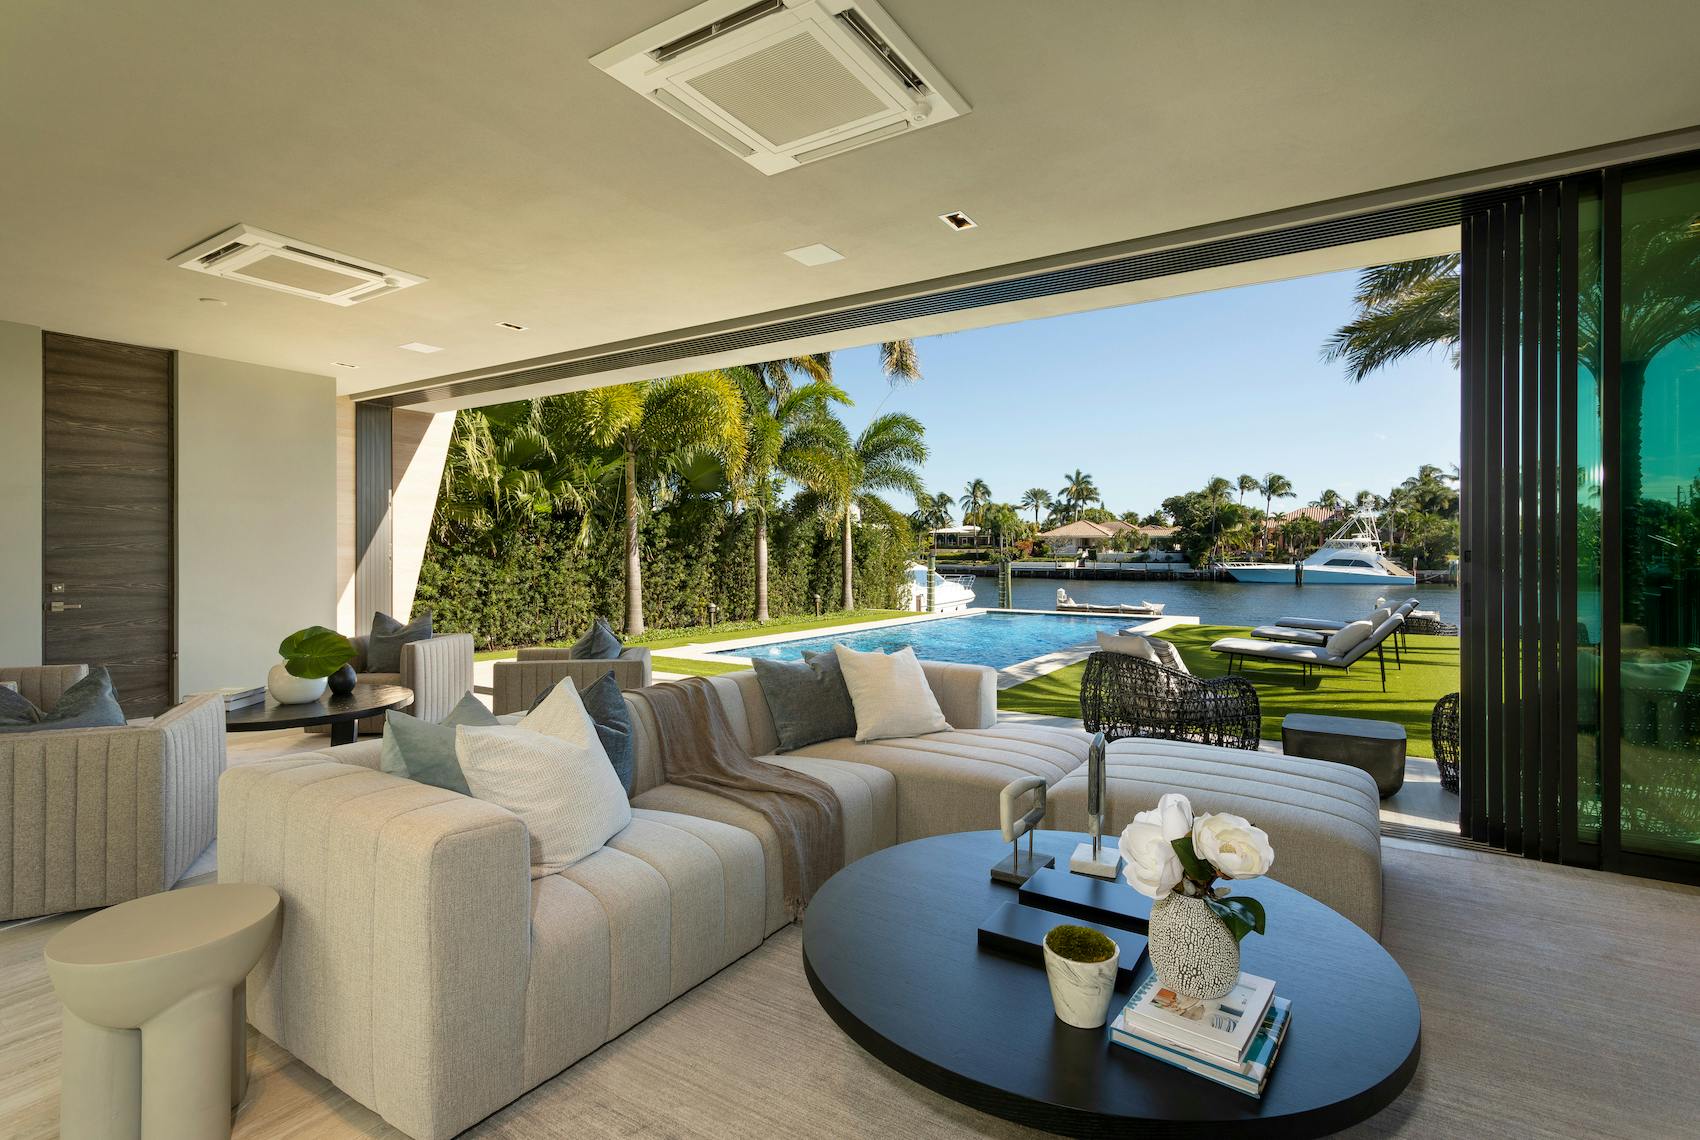 eridith-Baer-Home-Home-Staging-Florida-Modern-Intracoastal-Estate-Luxury-Homes-Modern-and-Contemporary-Living-Room-Patio